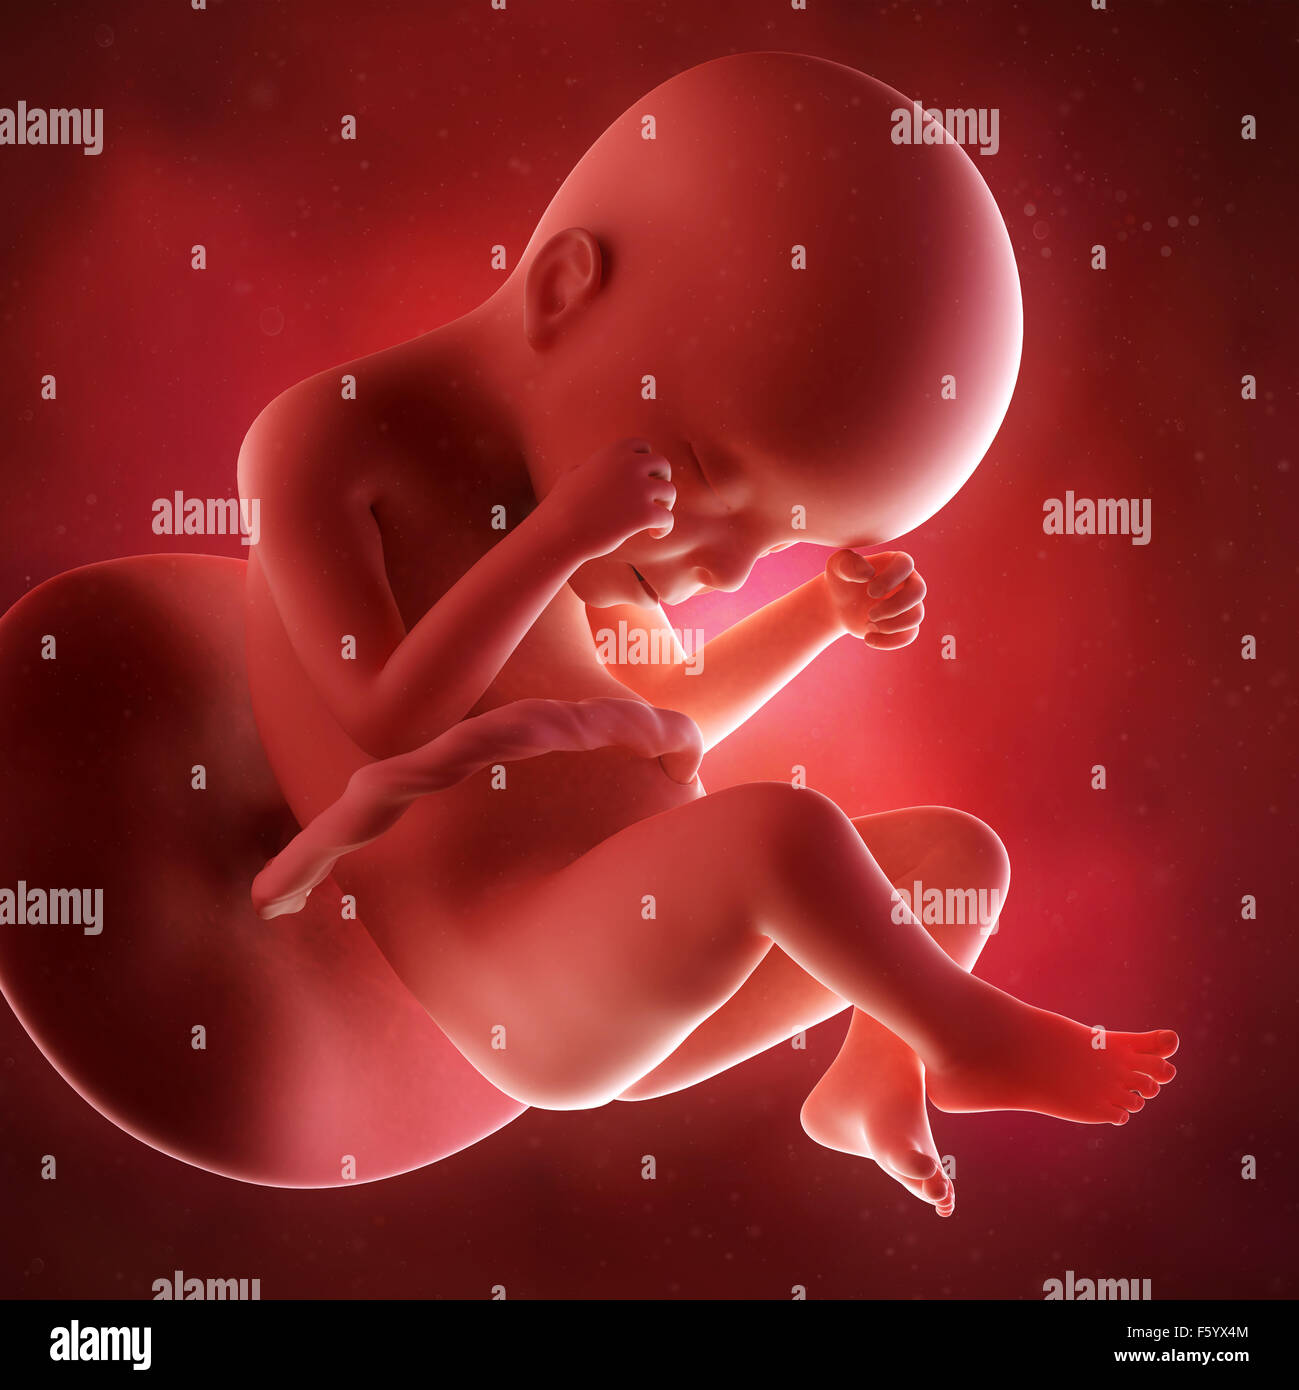 medical accurate 3d illustration of a fetus week 24 Stock Photo